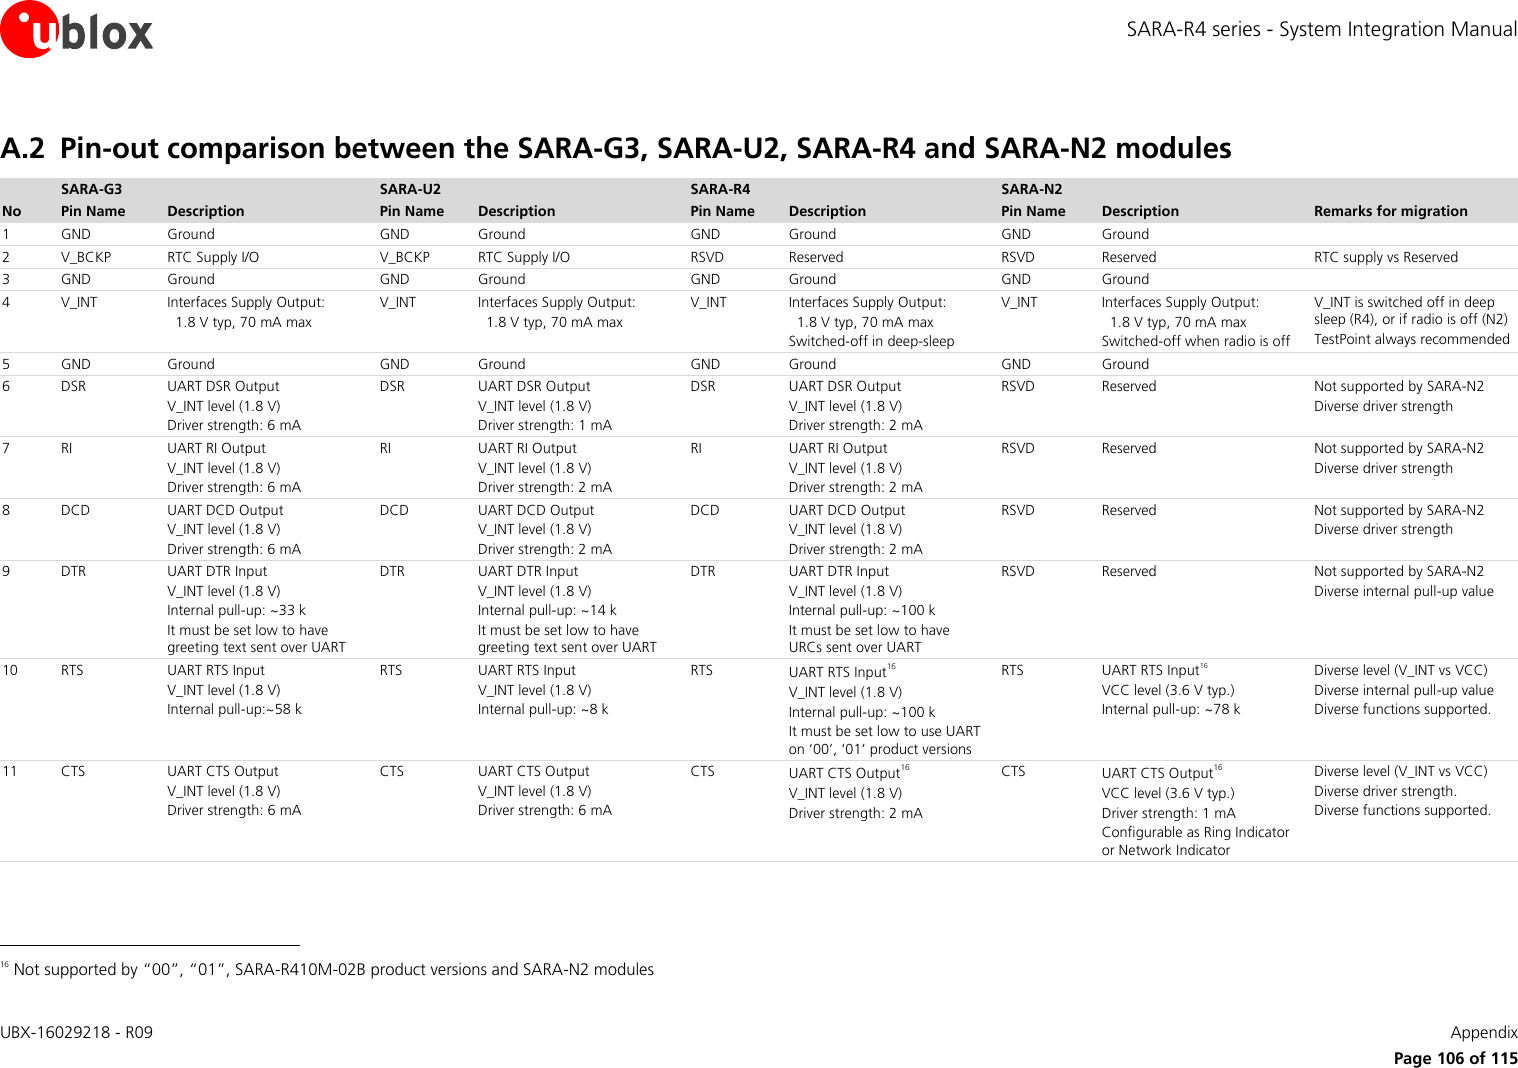 SARA-R4 series - System Integration Manual UBX-16029218 - R09    Appendix      Page 106 of 115 A.2 Pin-out comparison between the SARA-G3, SARA-U2, SARA-R4 and SARA-N2 modules  SARA-G3  SARA-U2  SARA-R4  SARA-N2   No Pin Name Description Pin Name Description Pin Name Description Pin Name Description Remarks for migration 1 GND Ground GND Ground GND Ground GND Ground  2 V_BCKP RTC Supply I/O V_BCKP RTC Supply I/O RSVD Reserved  RSVD Reserved  RTC supply vs Reserved  3 GND Ground GND Ground GND Ground GND Ground  4 V_INT Interfaces Supply Output:   1.8 V typ, 70 mA max V_INT Interfaces Supply Output:   1.8 V typ, 70 mA max V_INT Interfaces Supply Output:   1.8 V typ, 70 mA max Switched-off in deep-sleep  V_INT Interfaces Supply Output:   1.8 V typ, 70 mA max Switched-off when radio is off V_INT is switched off in deep sleep (R4), or if radio is off (N2) TestPoint always recommended 5 GND Ground GND Ground GND Ground GND Ground  6 DSR UART DSR Output V_INT level (1.8 V) Driver strength: 6 mA DSR UART DSR Output V_INT level (1.8 V) Driver strength: 1 mA DSR UART DSR Output V_INT level (1.8 V) Driver strength: 2 mA RSVD Reserved Not supported by SARA-N2 Diverse driver strength  7 RI UART RI Output V_INT level (1.8 V) Driver strength: 6 mA RI UART RI Output V_INT level (1.8 V) Driver strength: 2 mA RI UART RI Output V_INT level (1.8 V) Driver strength: 2 mA RSVD Reserved Not supported by SARA-N2 Diverse driver strength  8 DCD UART DCD Output V_INT level (1.8 V) Driver strength: 6 mA DCD UART DCD Output V_INT level (1.8 V) Driver strength: 2 mA DCD UART DCD Output V_INT level (1.8 V) Driver strength: 2 mA RSVD Reserved Not supported by SARA-N2 Diverse driver strength  9 DTR UART DTR Input V_INT level (1.8 V) Internal pull-up: ~33 k  It must be set low to have greeting text sent over UART DTR UART DTR Input V_INT level (1.8 V) Internal pull-up: ~14 k  It must be set low to have greeting text sent over UART DTR UART DTR Input V_INT level (1.8 V) Internal pull-up: ~100 k It must be set low to have URCs sent over UART RSVD Reserved Not supported by SARA-N2 Diverse internal pull-up value 10 RTS UART RTS Input V_INT level (1.8 V) Internal pull-up:~58 k RTS UART RTS Input V_INT level (1.8 V) Internal pull-up: ~8 k RTS UART RTS Input16 V_INT level (1.8 V) Internal pull-up: ~100 k It must be set low to use UART on ‘00’, ‘01’ product versions RTS UART RTS Input16 VCC level (3.6 V typ.) Internal pull-up: ~78 k Diverse level (V_INT vs VCC) Diverse internal pull-up value  Diverse functions supported. 11 CTS UART CTS Output V_INT level (1.8 V) Driver strength: 6 mA CTS UART CTS Output V_INT level (1.8 V) Driver strength: 6 mA CTS UART CTS Output16 V_INT level (1.8 V) Driver strength: 2 mA CTS UART CTS Output16 VCC level (3.6 V typ.) Driver strength: 1 mA Configurable as Ring Indicator or Network Indicator Diverse level (V_INT vs VCC) Diverse driver strength. Diverse functions supported.                                                       16 Not supported by “00”, “01”, SARA-R410M-02B product versions and SARA-N2 modules 